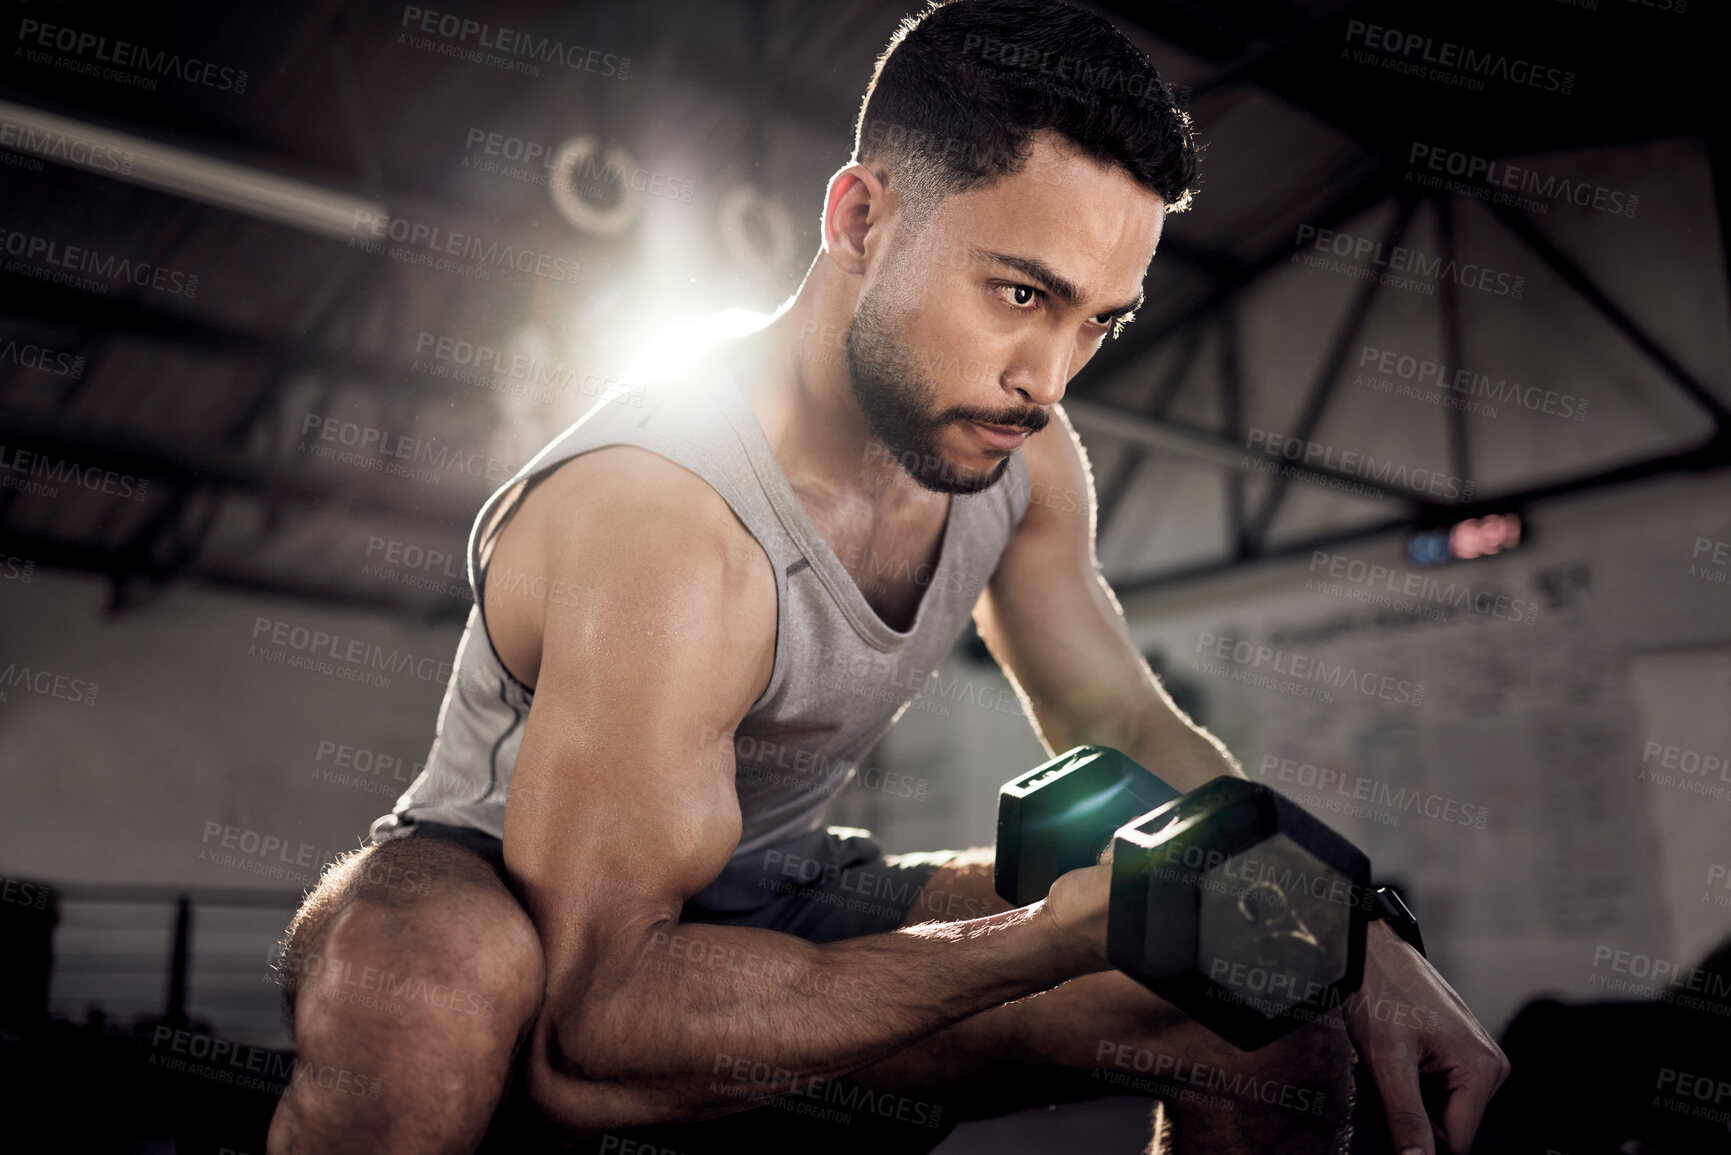 Buy stock photo Fitness, dumbbell or strong man training, exercise or workout for powerful arms or muscles at gym. Concentration curls, strength or serious Arab athlete lifting weights or exercising biceps in Dubai